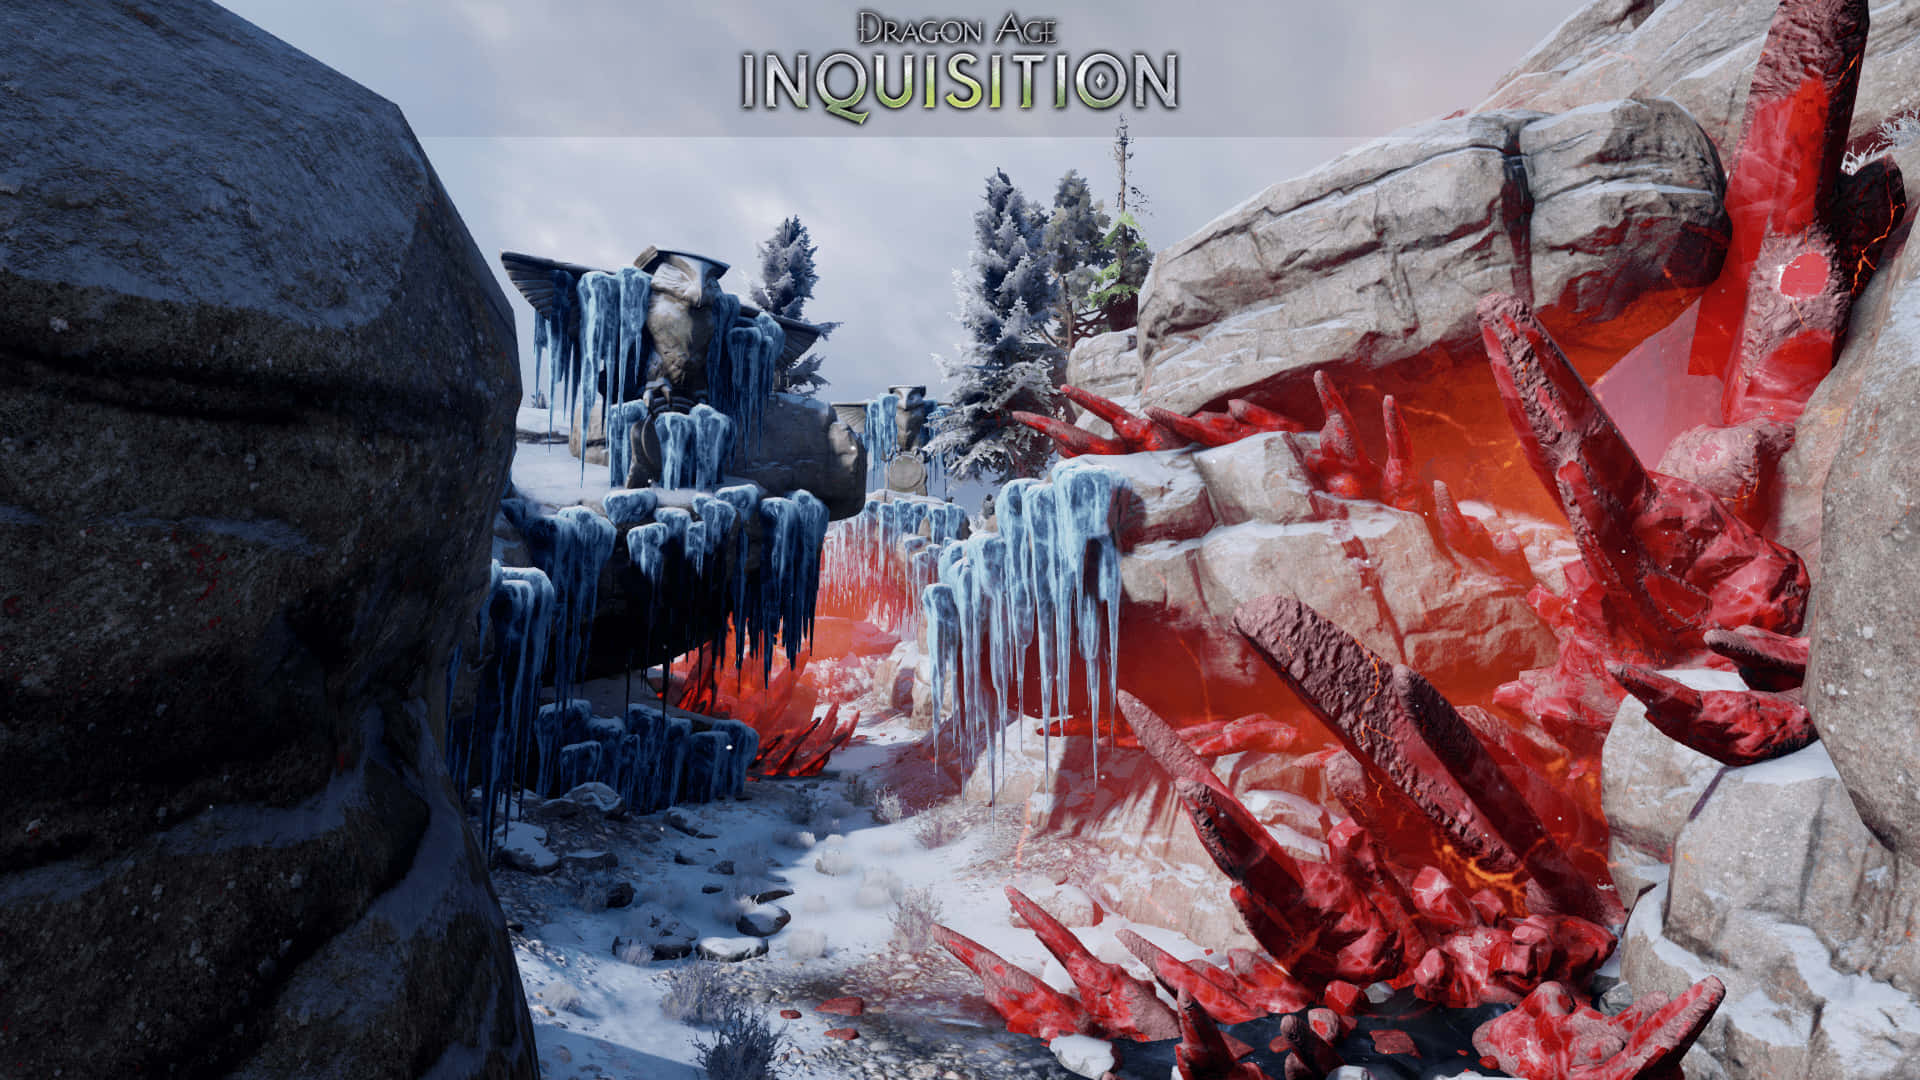 Explore the Fictional World of Dragon Age Inquisition in High-Definition